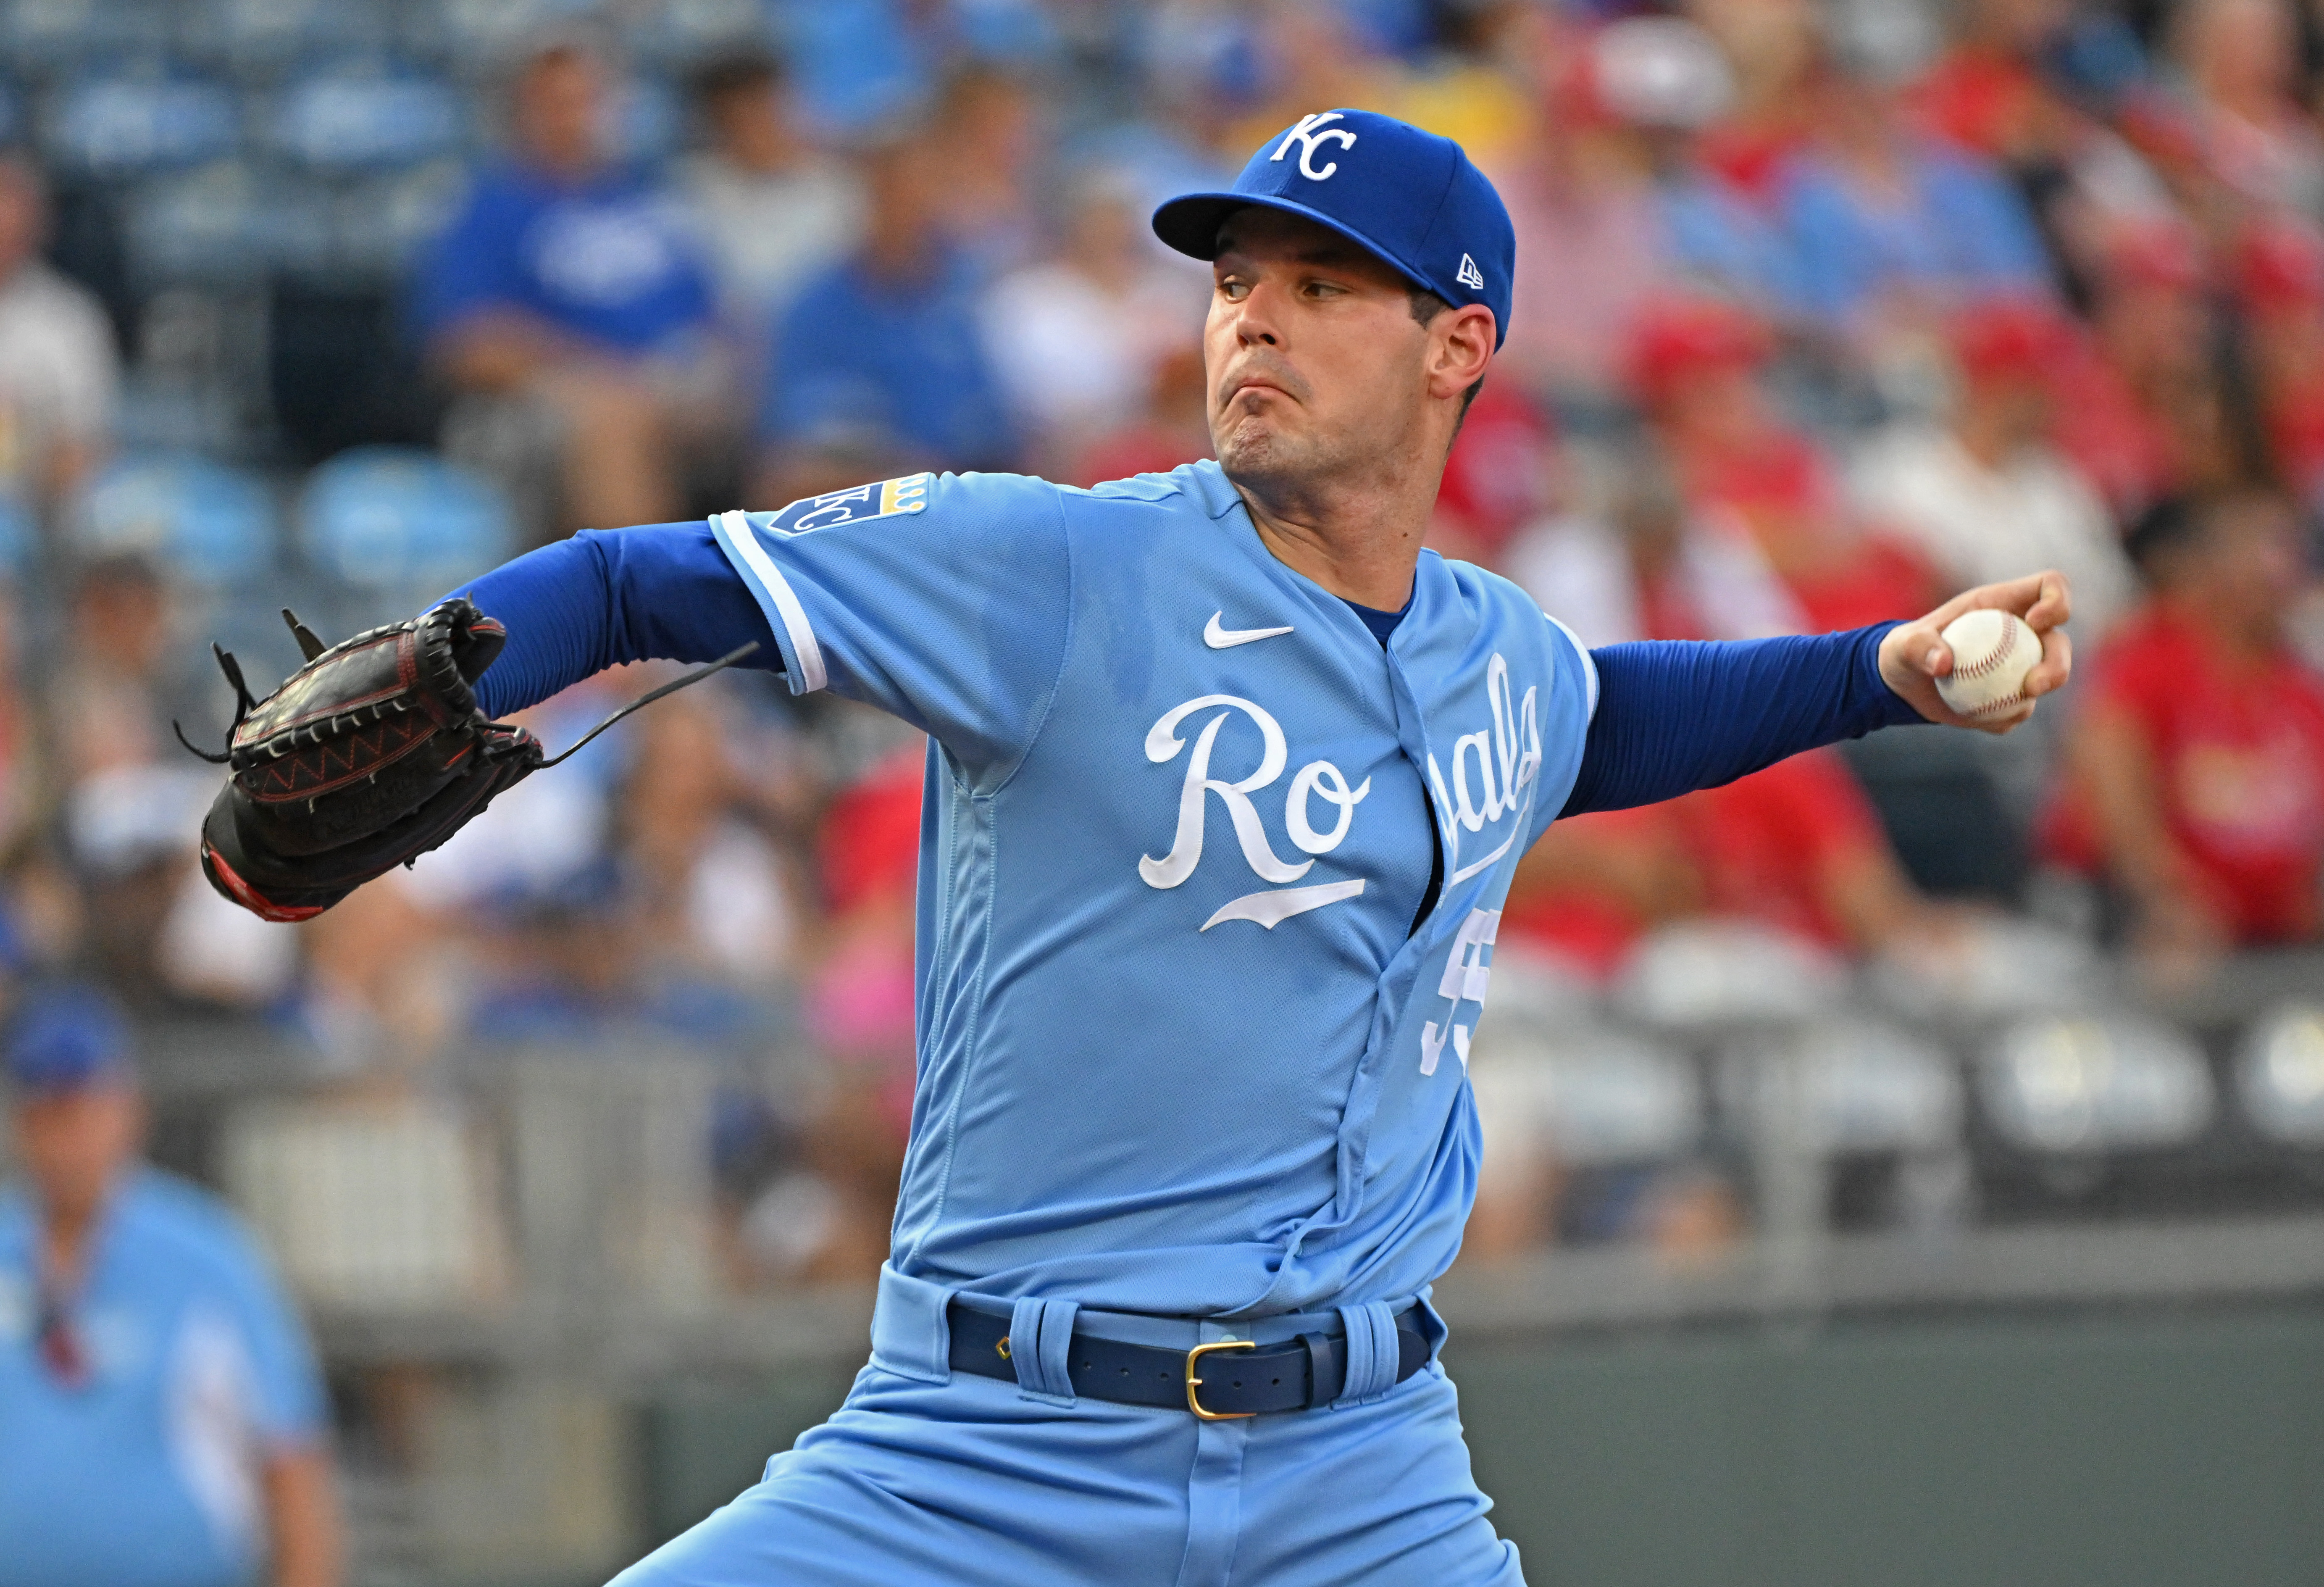 Kansas City, Missouri, USA; Kansas City Royals starting pitcher Cole Ragans (55) delivers a pitch in the first inning against the St. Louis Cardinals at Kauffman Stadium.